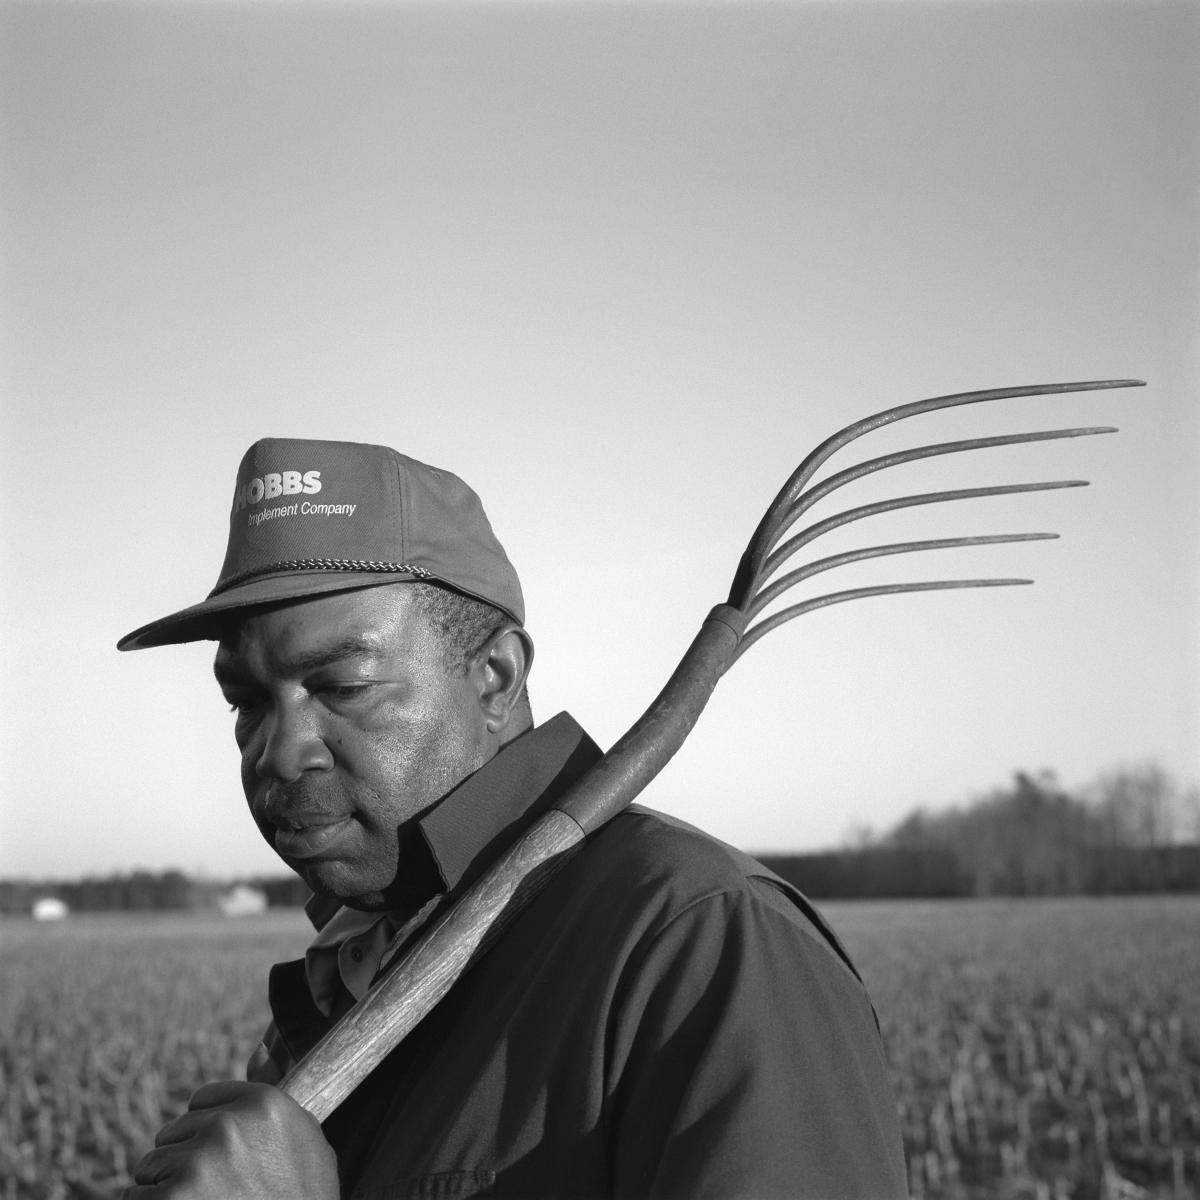 <p><center>Martin County, North Carolina:</center></p>
Herman Lynch worked on his grandfather's farm for many years, until the older man died. Because of legal problems with the farm's deed, the land was sold to a neighboring farmer. Lynch now tends his grandfather's land as hired help. : Images : AMERICAN BLACK FARMERS PROJECT - John Ficara